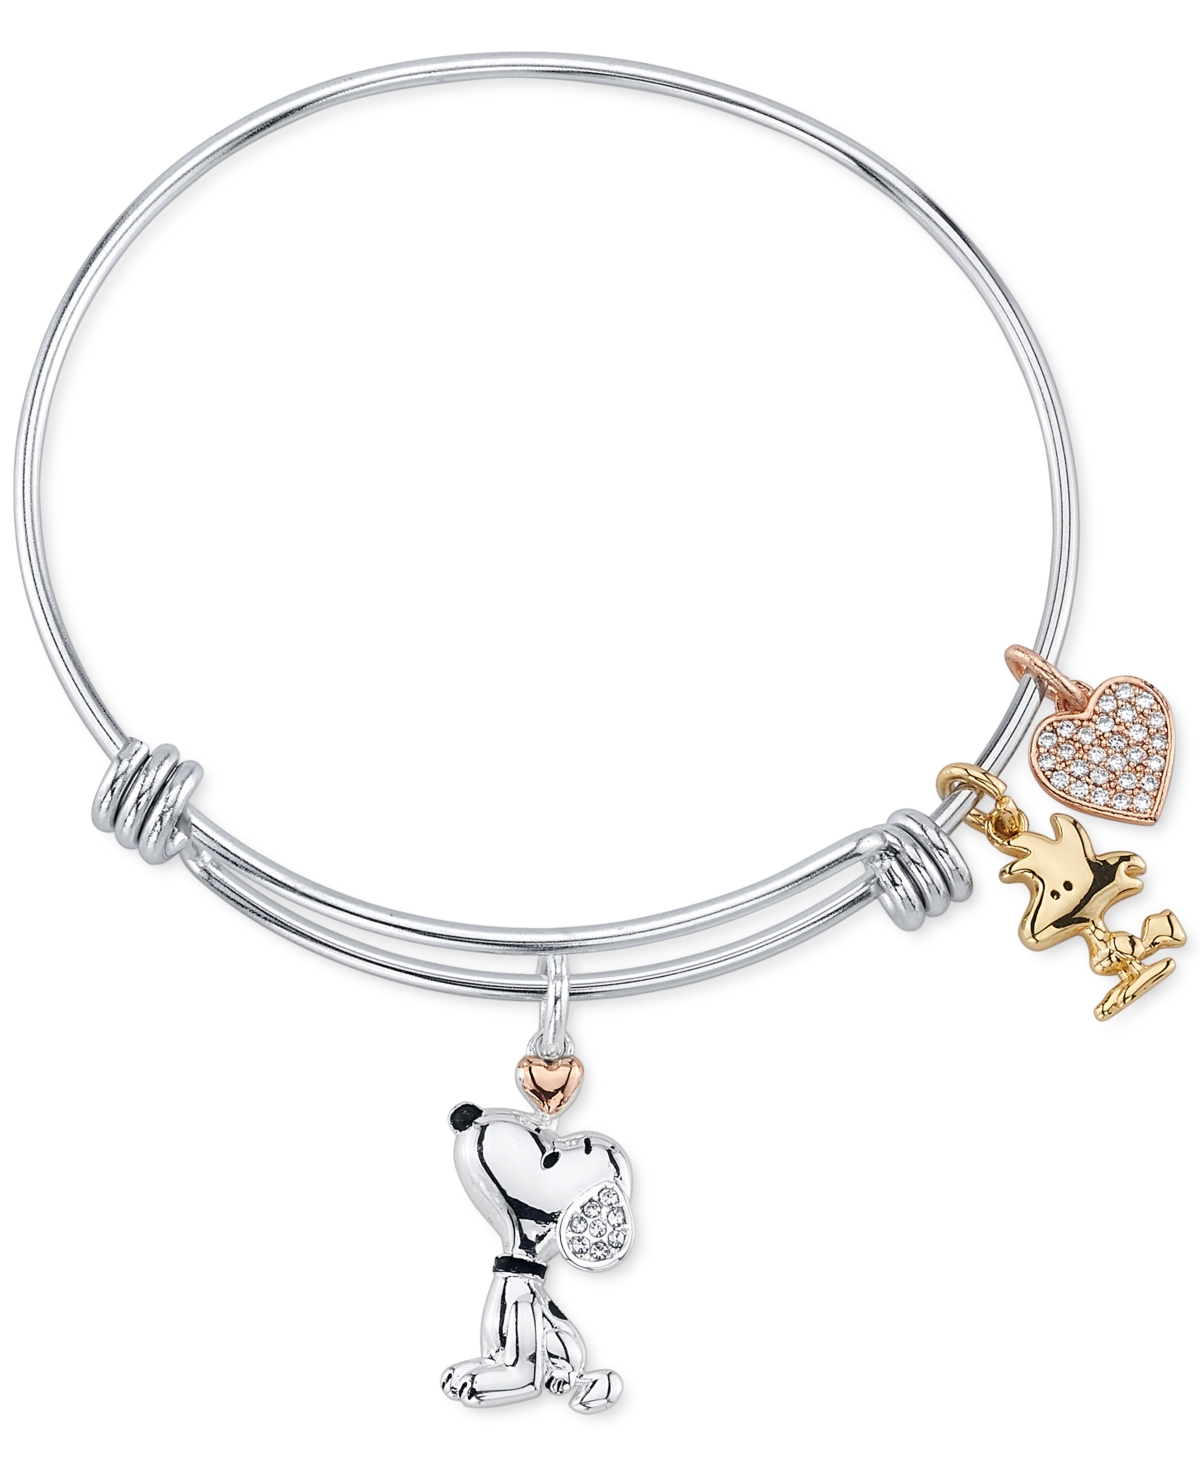 Unwritten Snoopy & Woodstock Bangle Bracelet in Stainless Steel with Silver Plated Charms - Tri-Tone